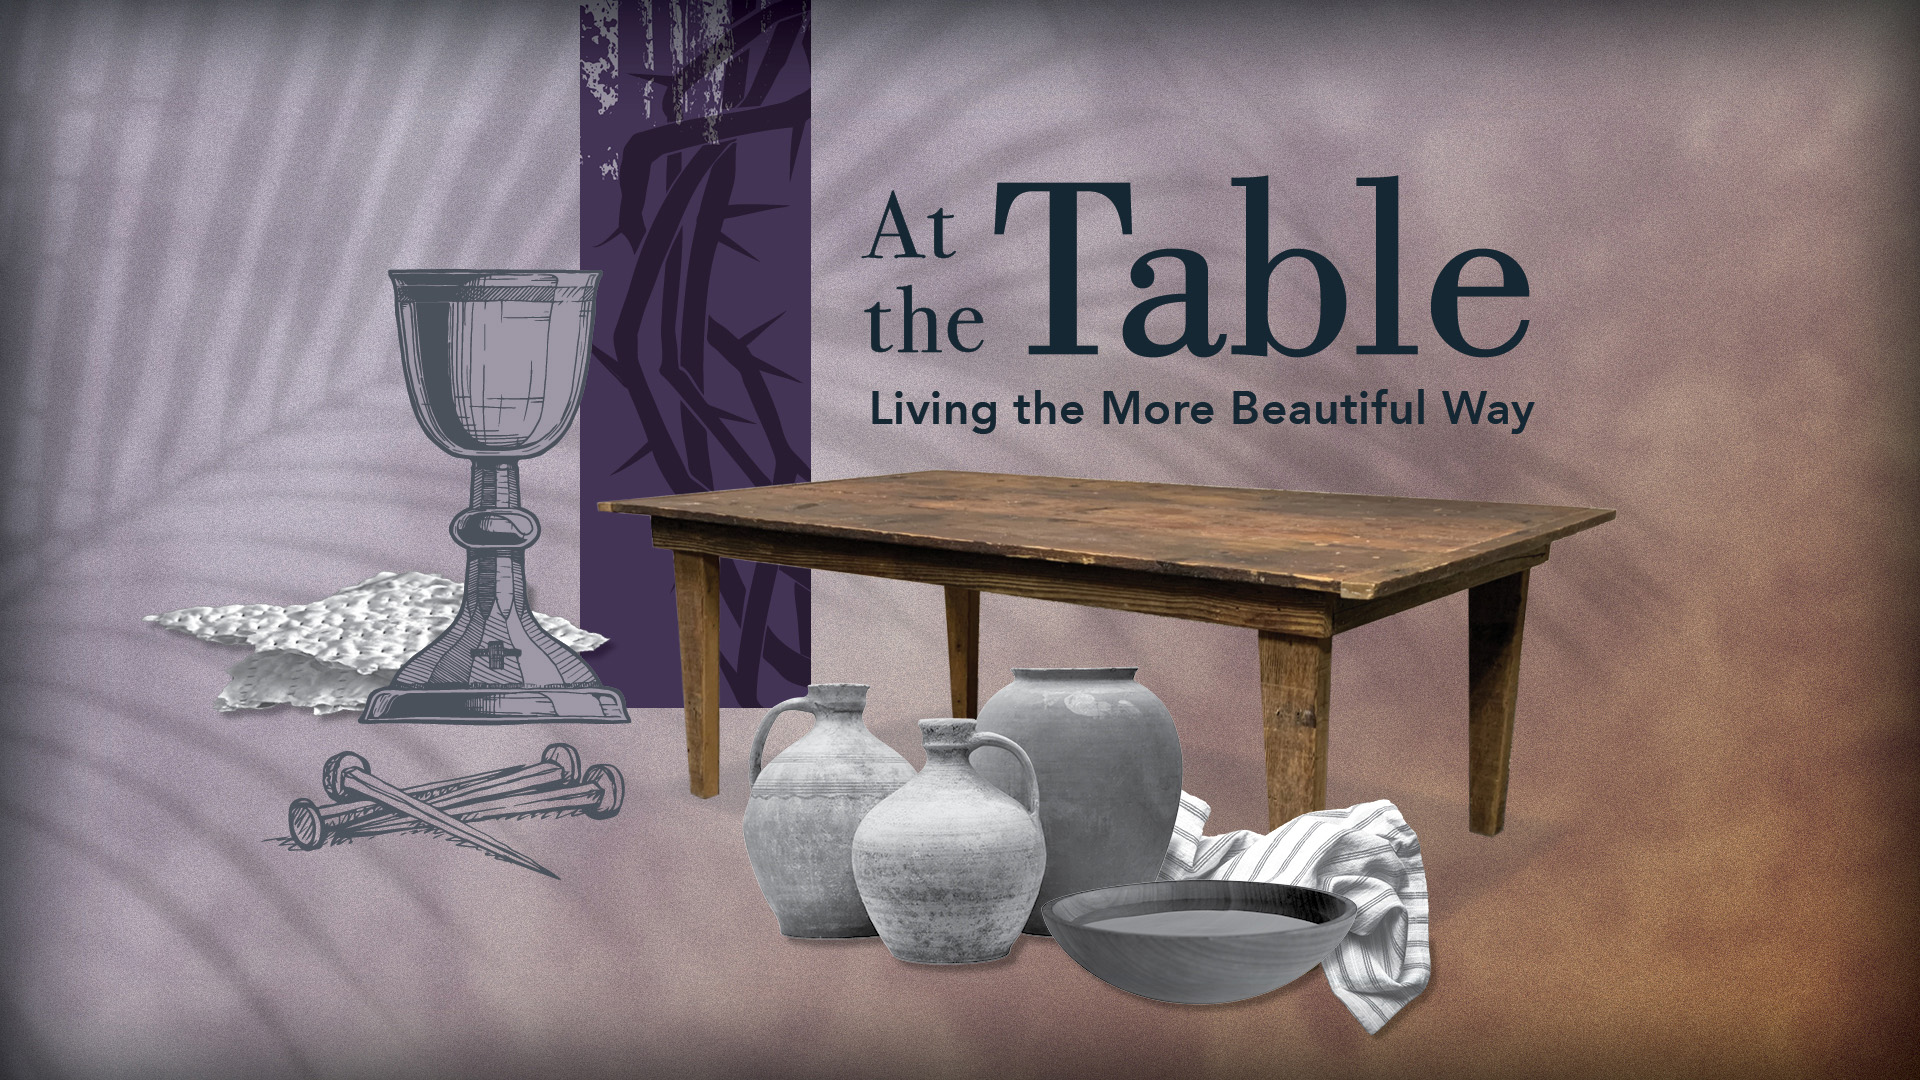 At the Table
February 26–March 26
9:00 & 10:45 a.m. | Oak Brook
10:00 a.m. | Butterfield
